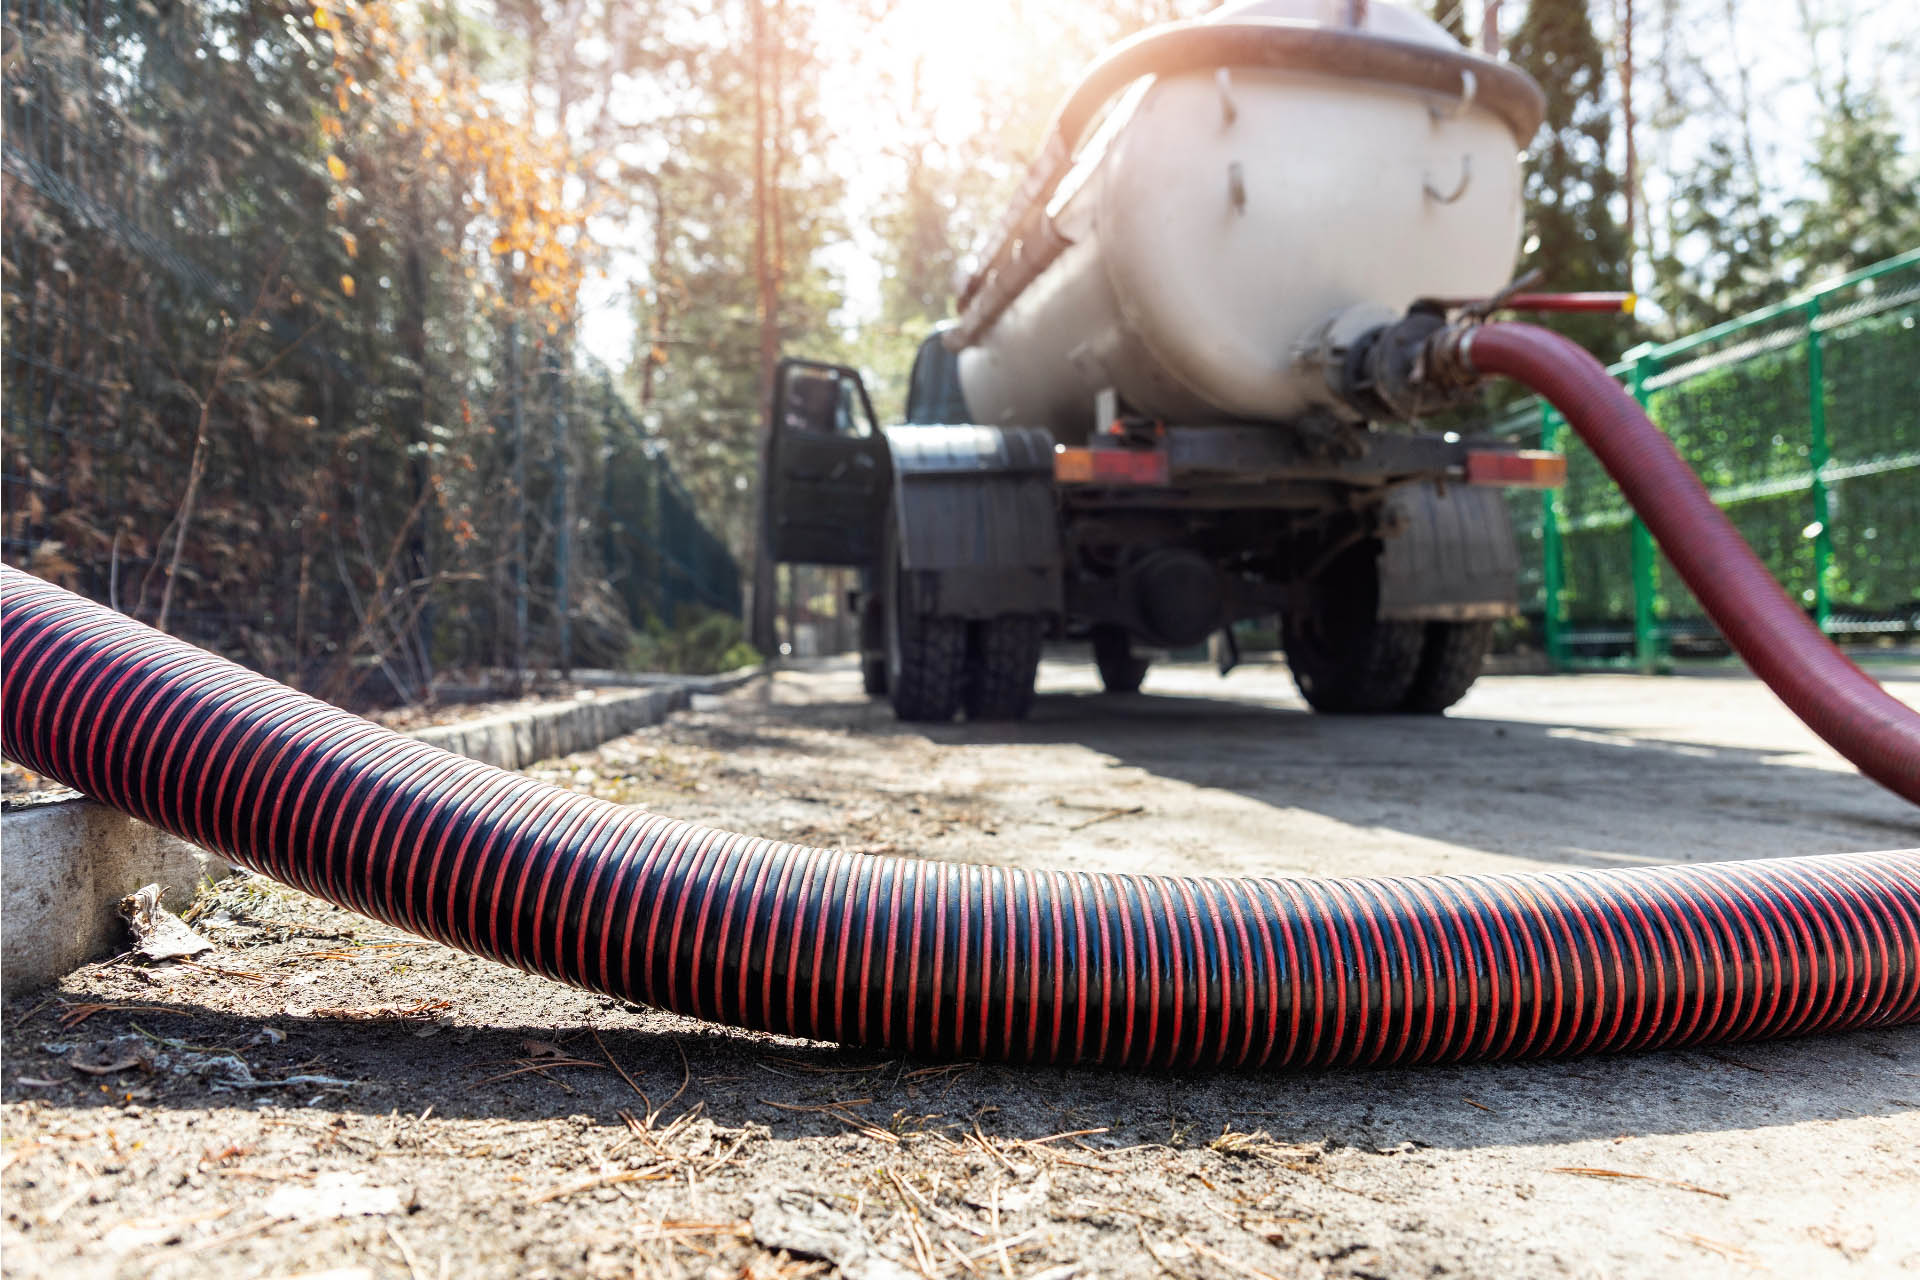 A hose connected to a truck at home on a dirt road provides septic tank pumping services.